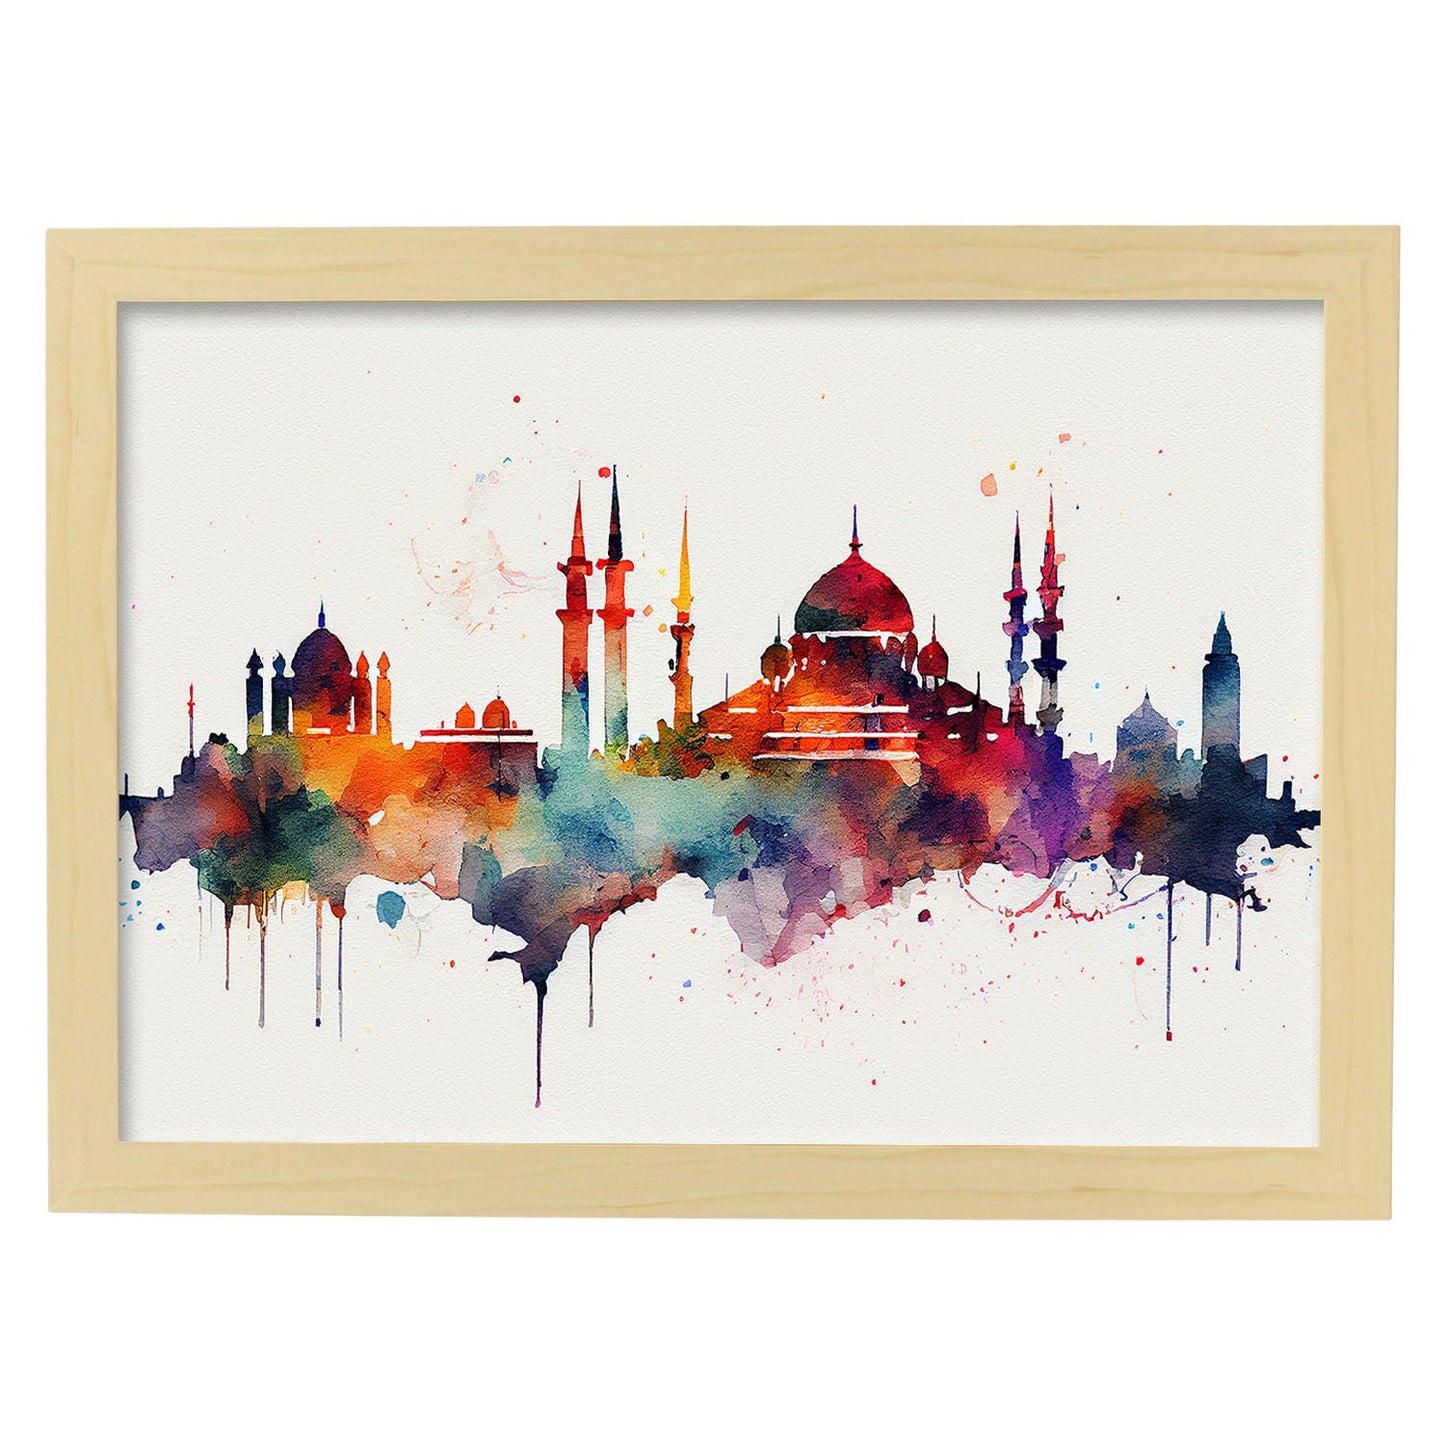 Nacnic watercolor of a skyline of the city of Istanbul_4. Aesthetic Wall Art Prints for Bedroom or Living Room Design.-Artwork-Nacnic-A4-Marco Madera Clara-Nacnic Estudio SL